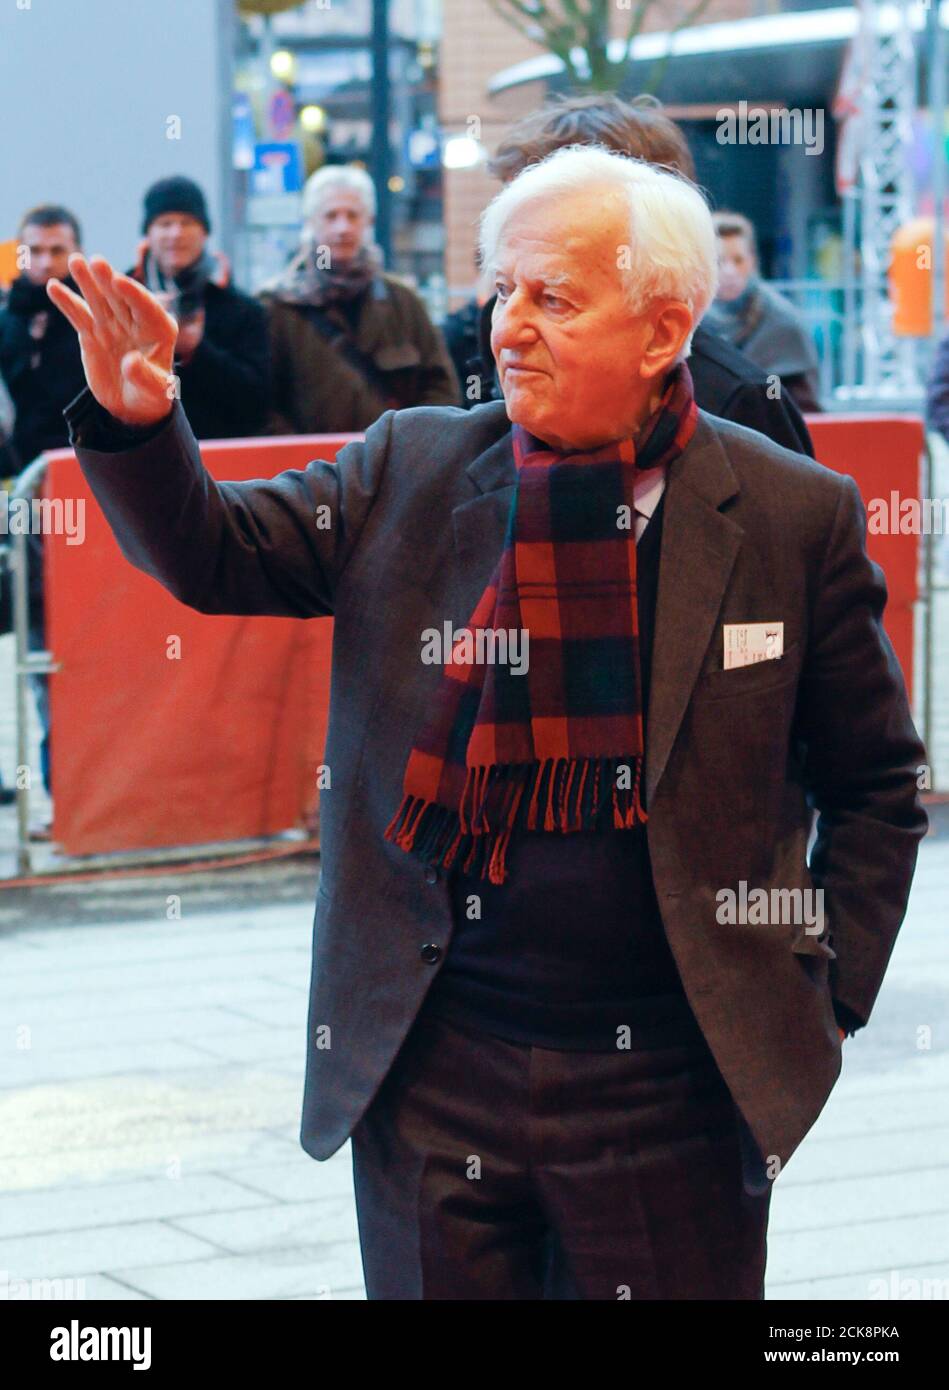 Former German President Richard von Weizsacker arrives for the screening of the movie 'Der Rauber' (The Robber) at the Berlinale International Film Festival February 15, 2010. The Berlinale film festival celebrates its 60th anniversary this year and runs until February 21. REUTERS/Thomas Peter (GERMANY - Tags: ENTERTAINMENT POLITICS) Stock Photo